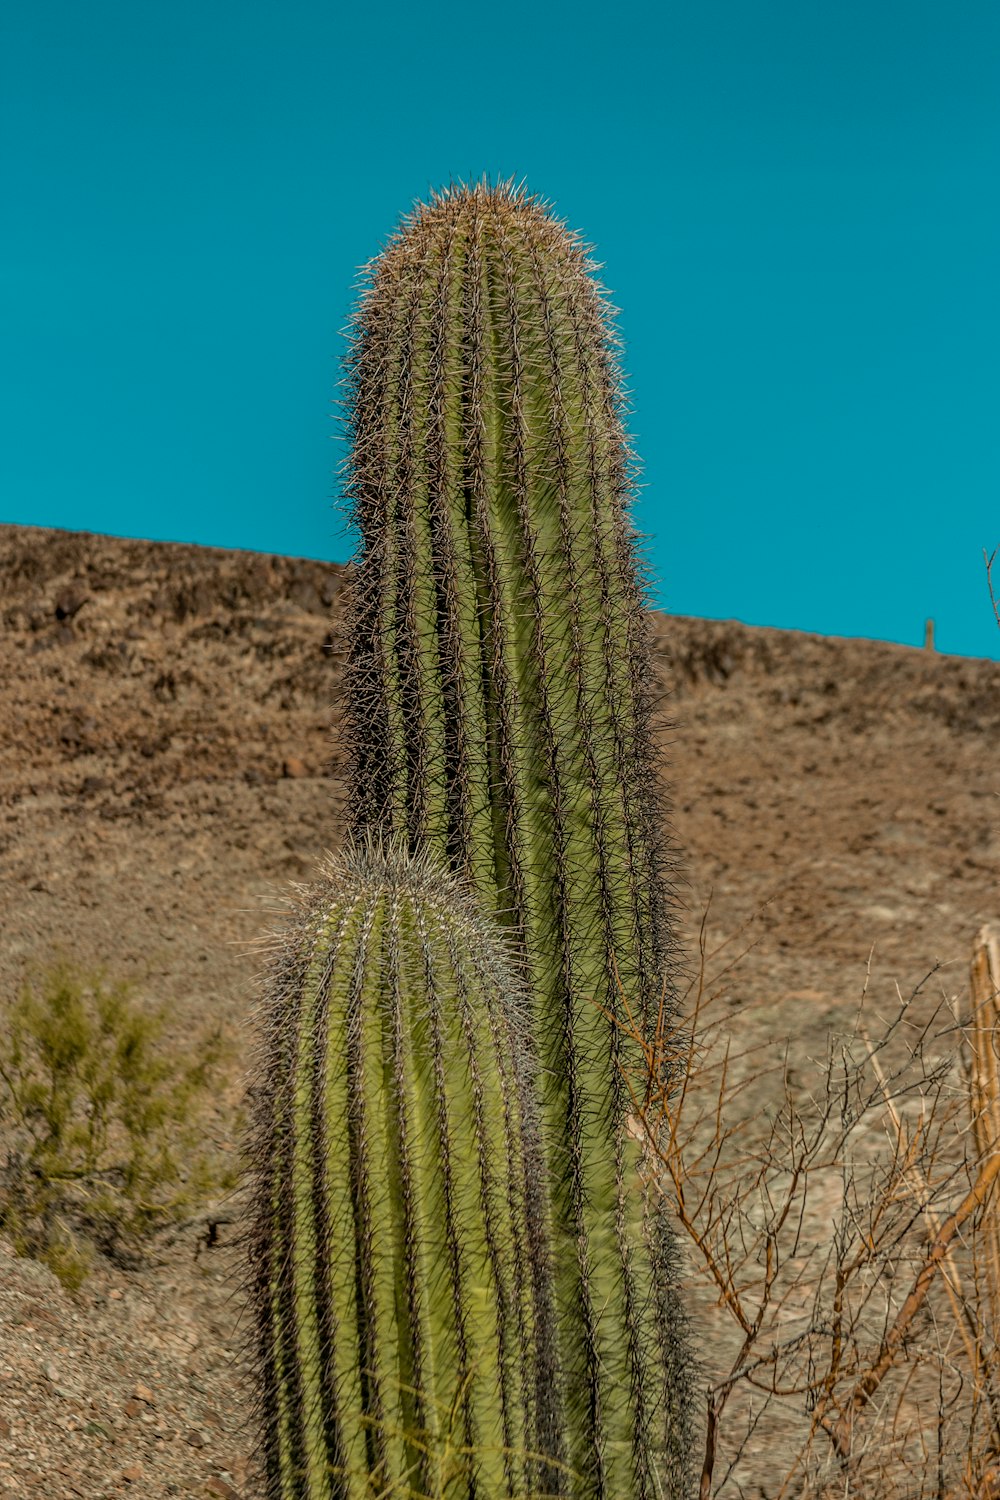 a large cactus in the desert with a blue sky in the background